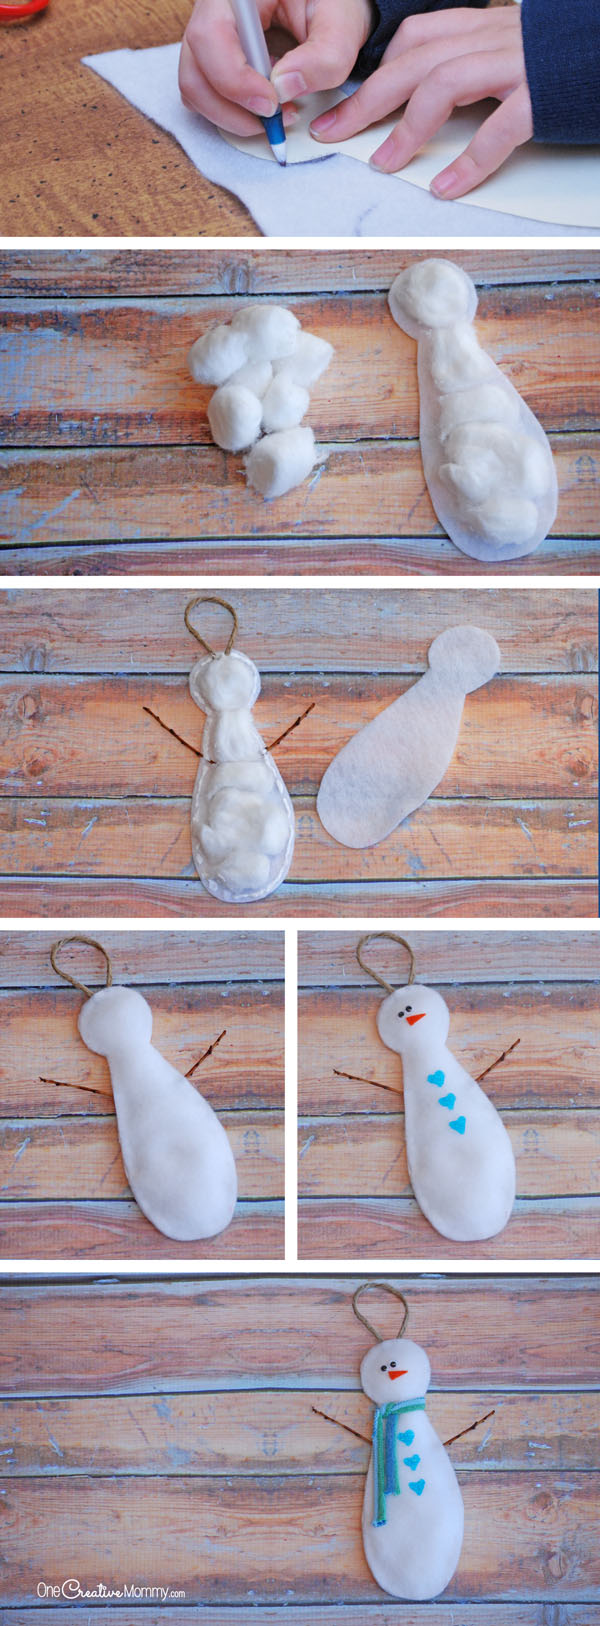 These adorable felt snowmen make perfect Christmas ornaments or doorknob hangers! Such a fun kids craft {OneCreativeMommy.com}